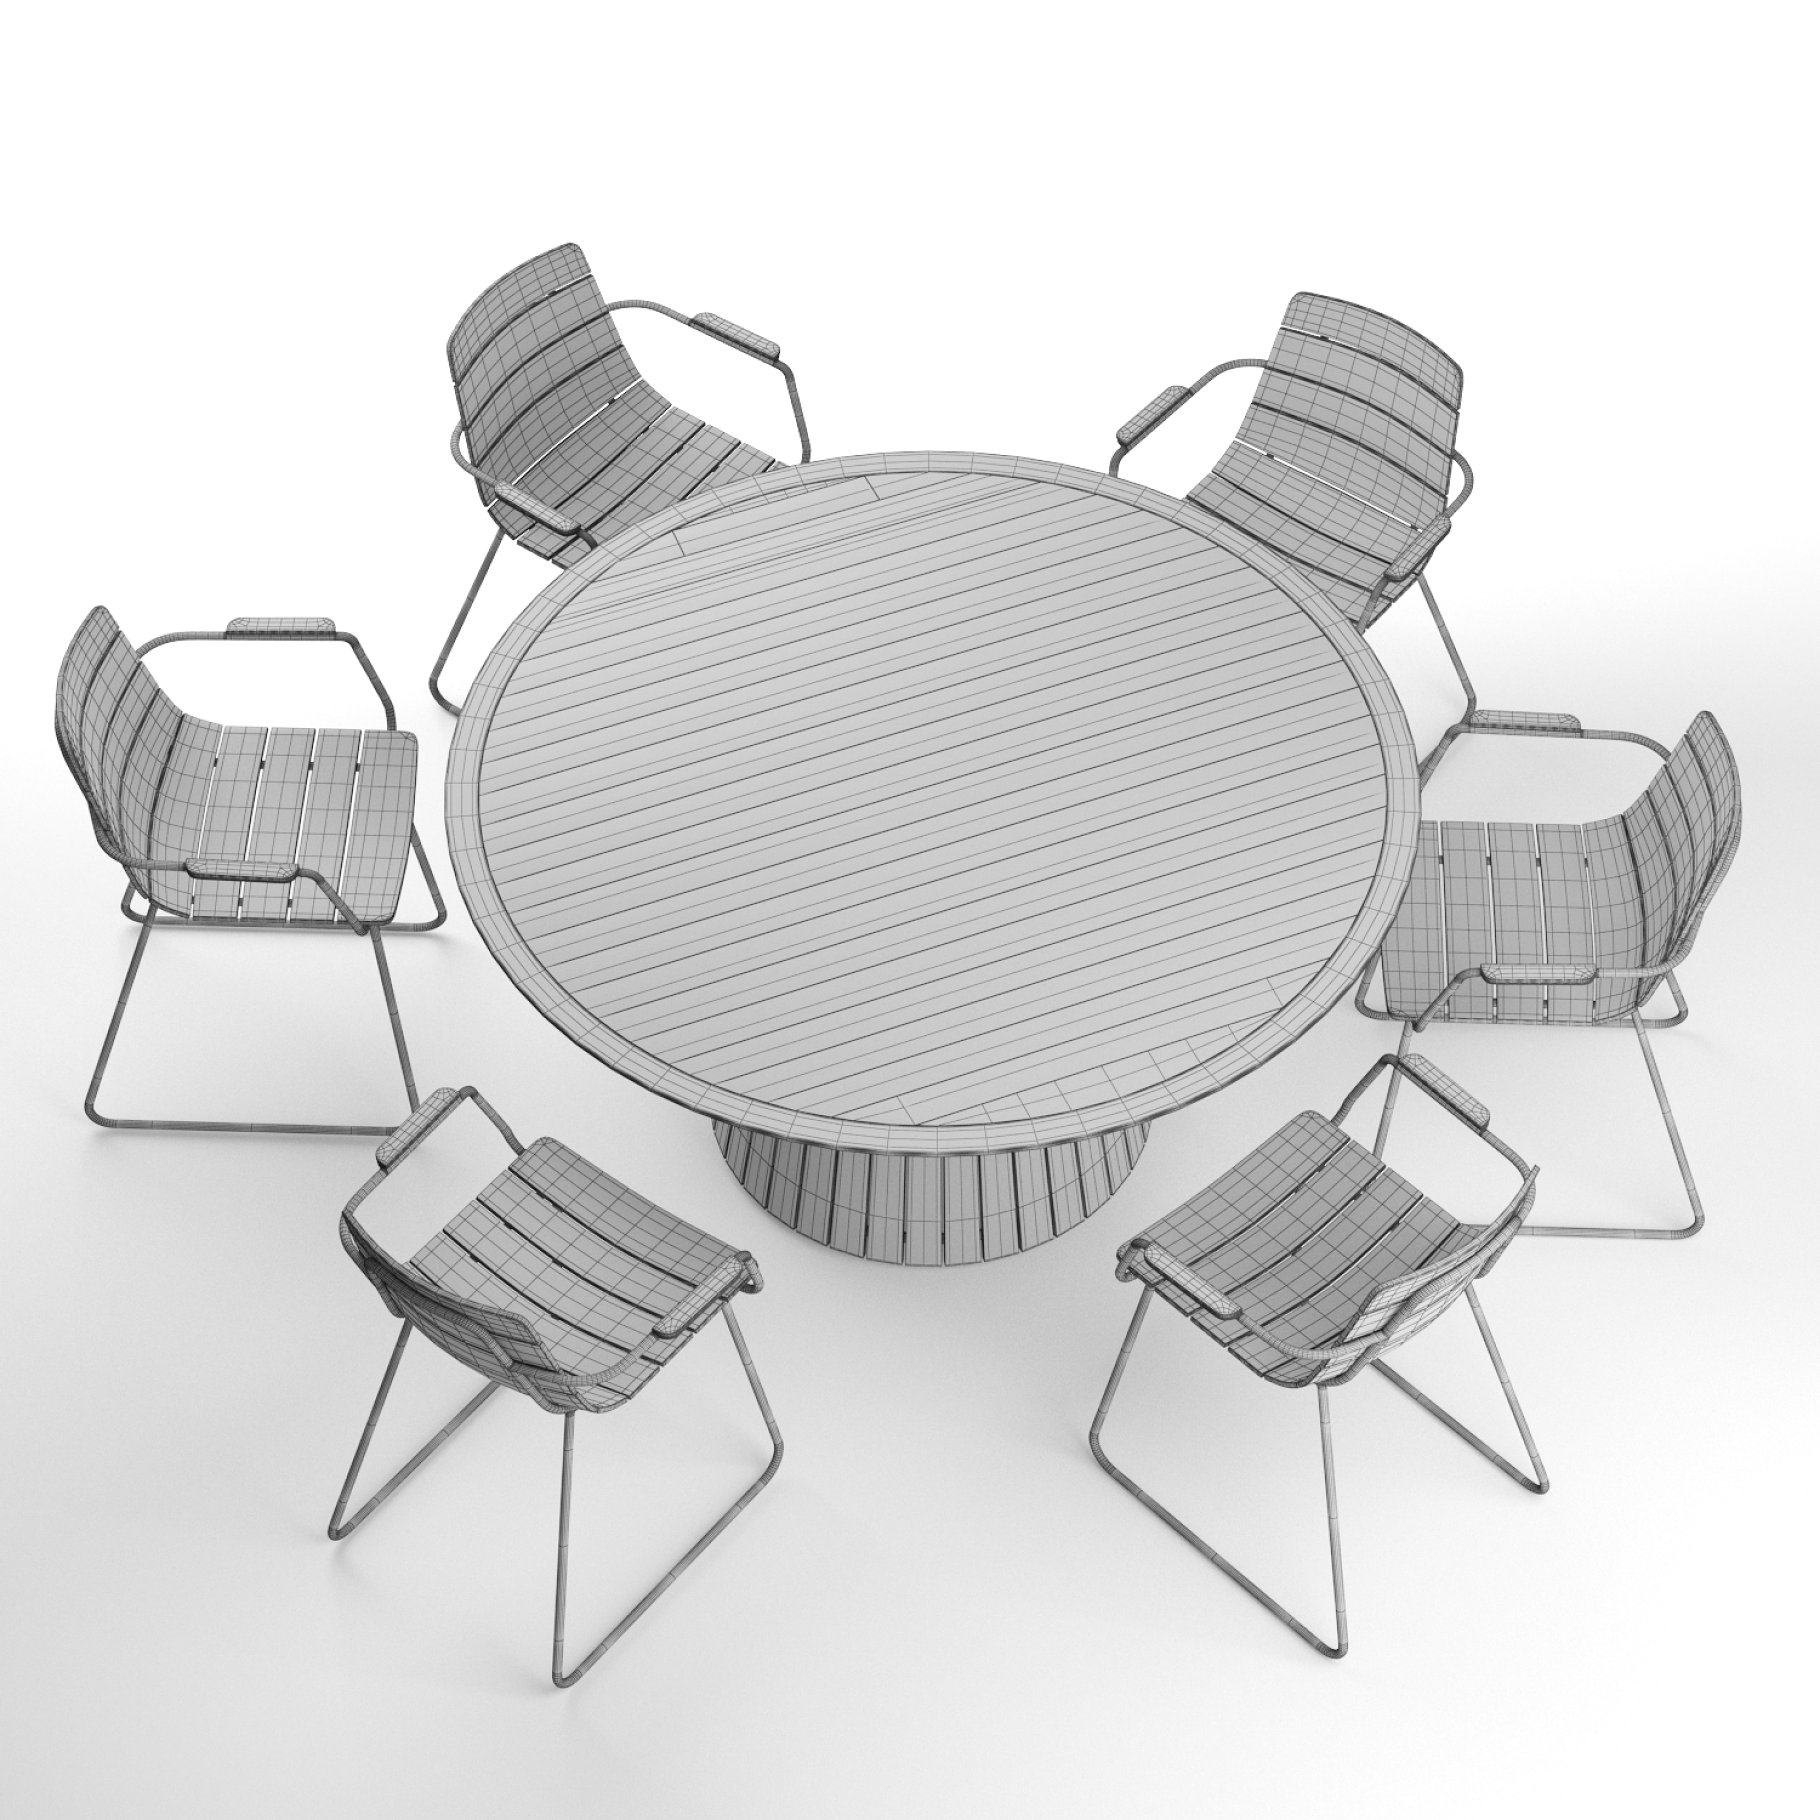 Whirl round table with gloster william dining armchair.